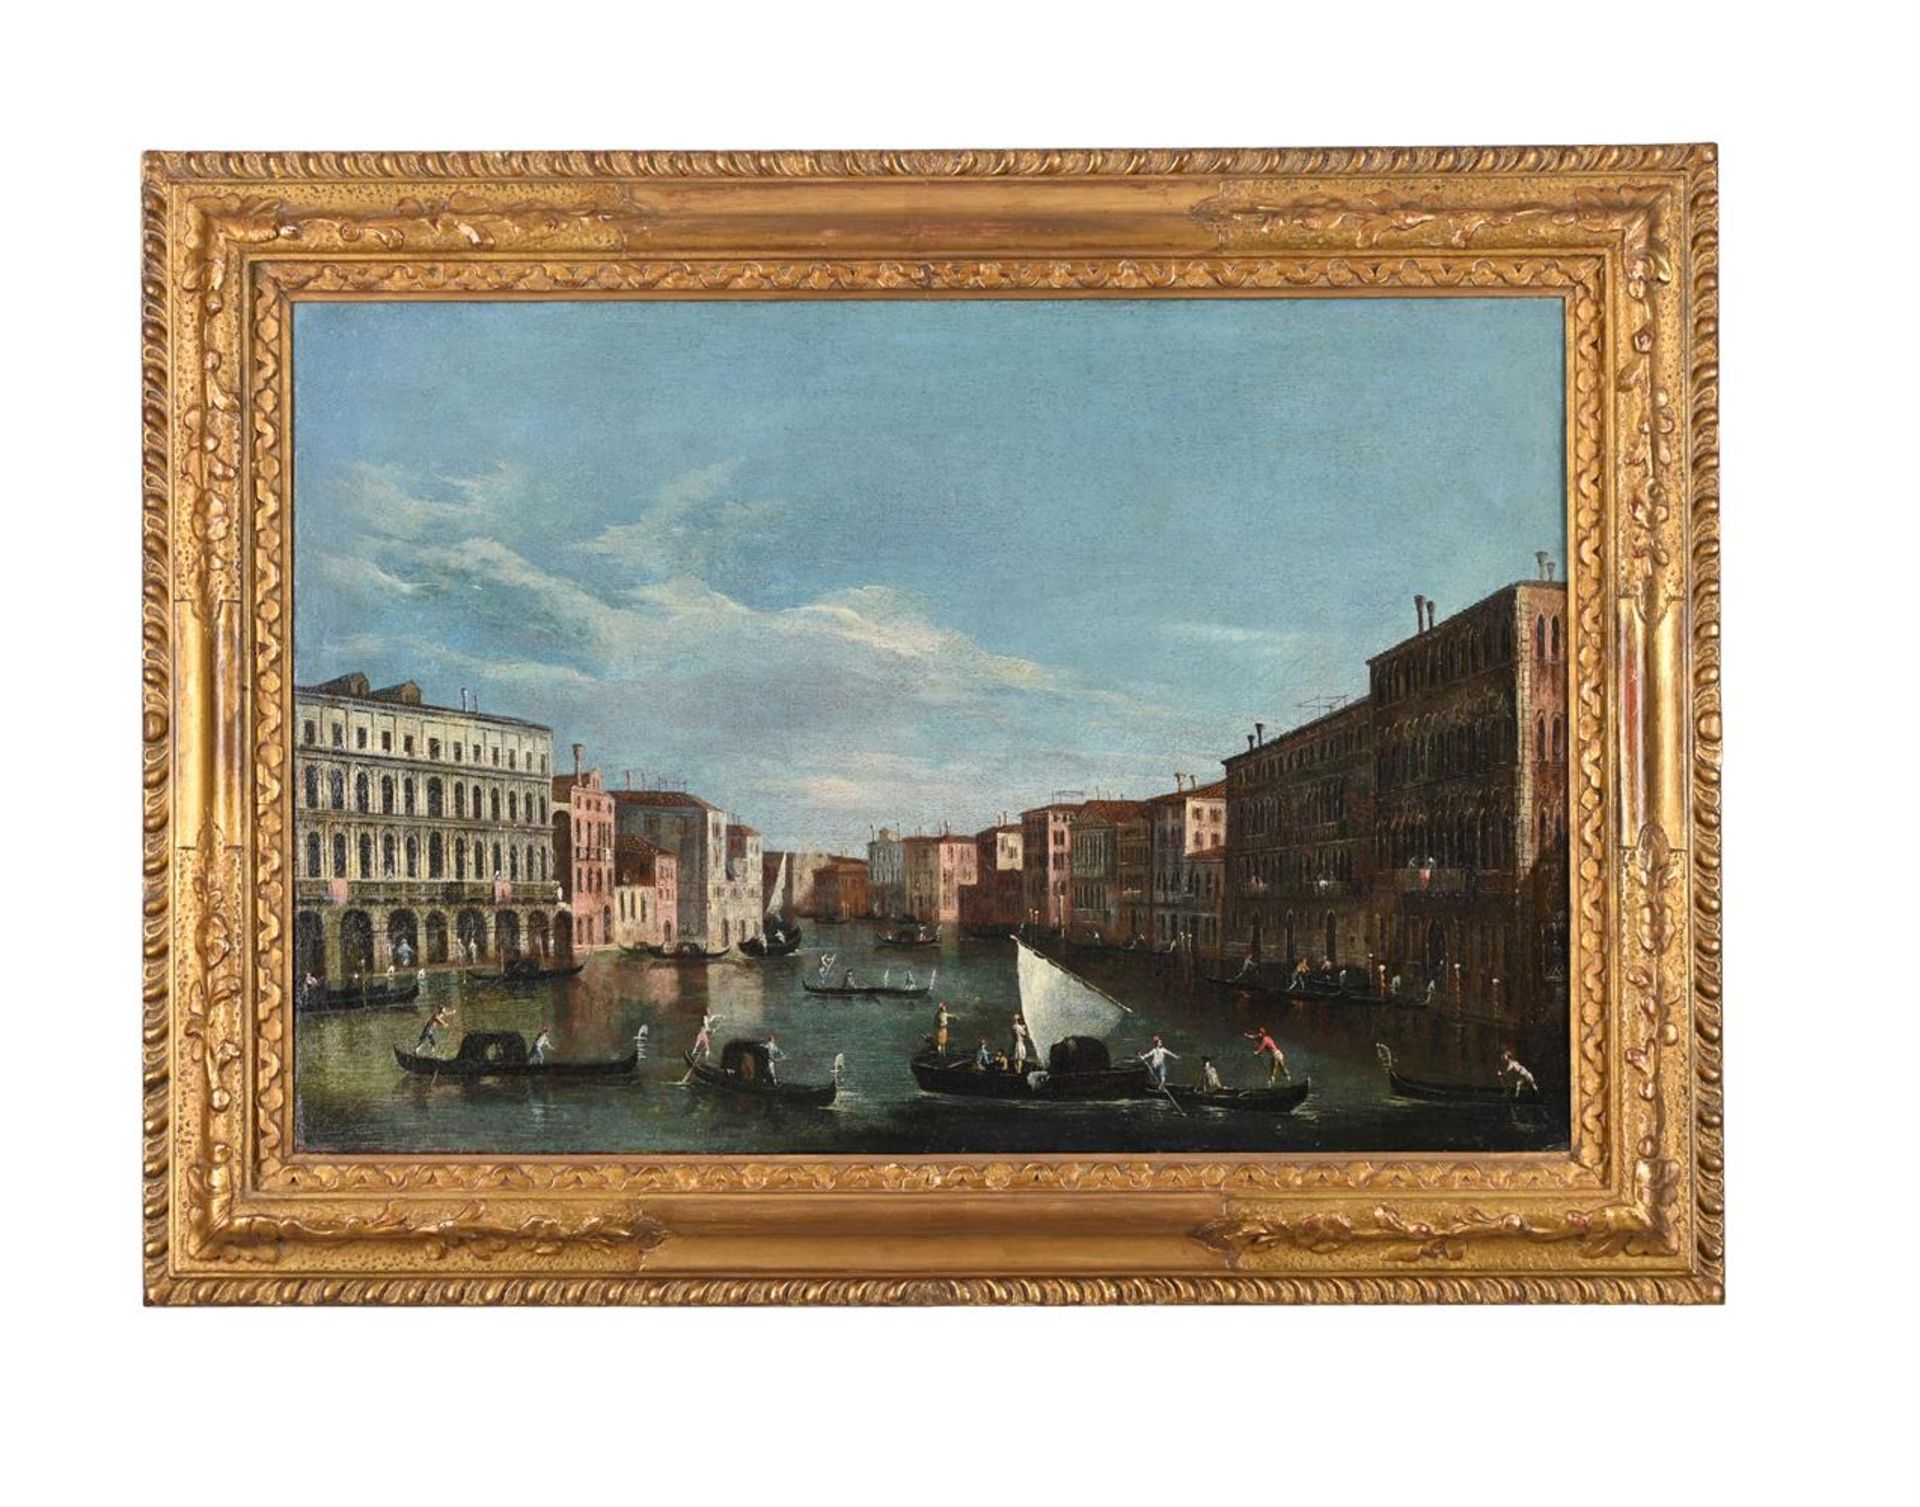 ATTRIBUTED TO THE MASTER OF THE LANGMATT FOUNDATION VIEWS (ITALIAN FL. 1740-1770), THE GRAND CANAL - Image 2 of 3